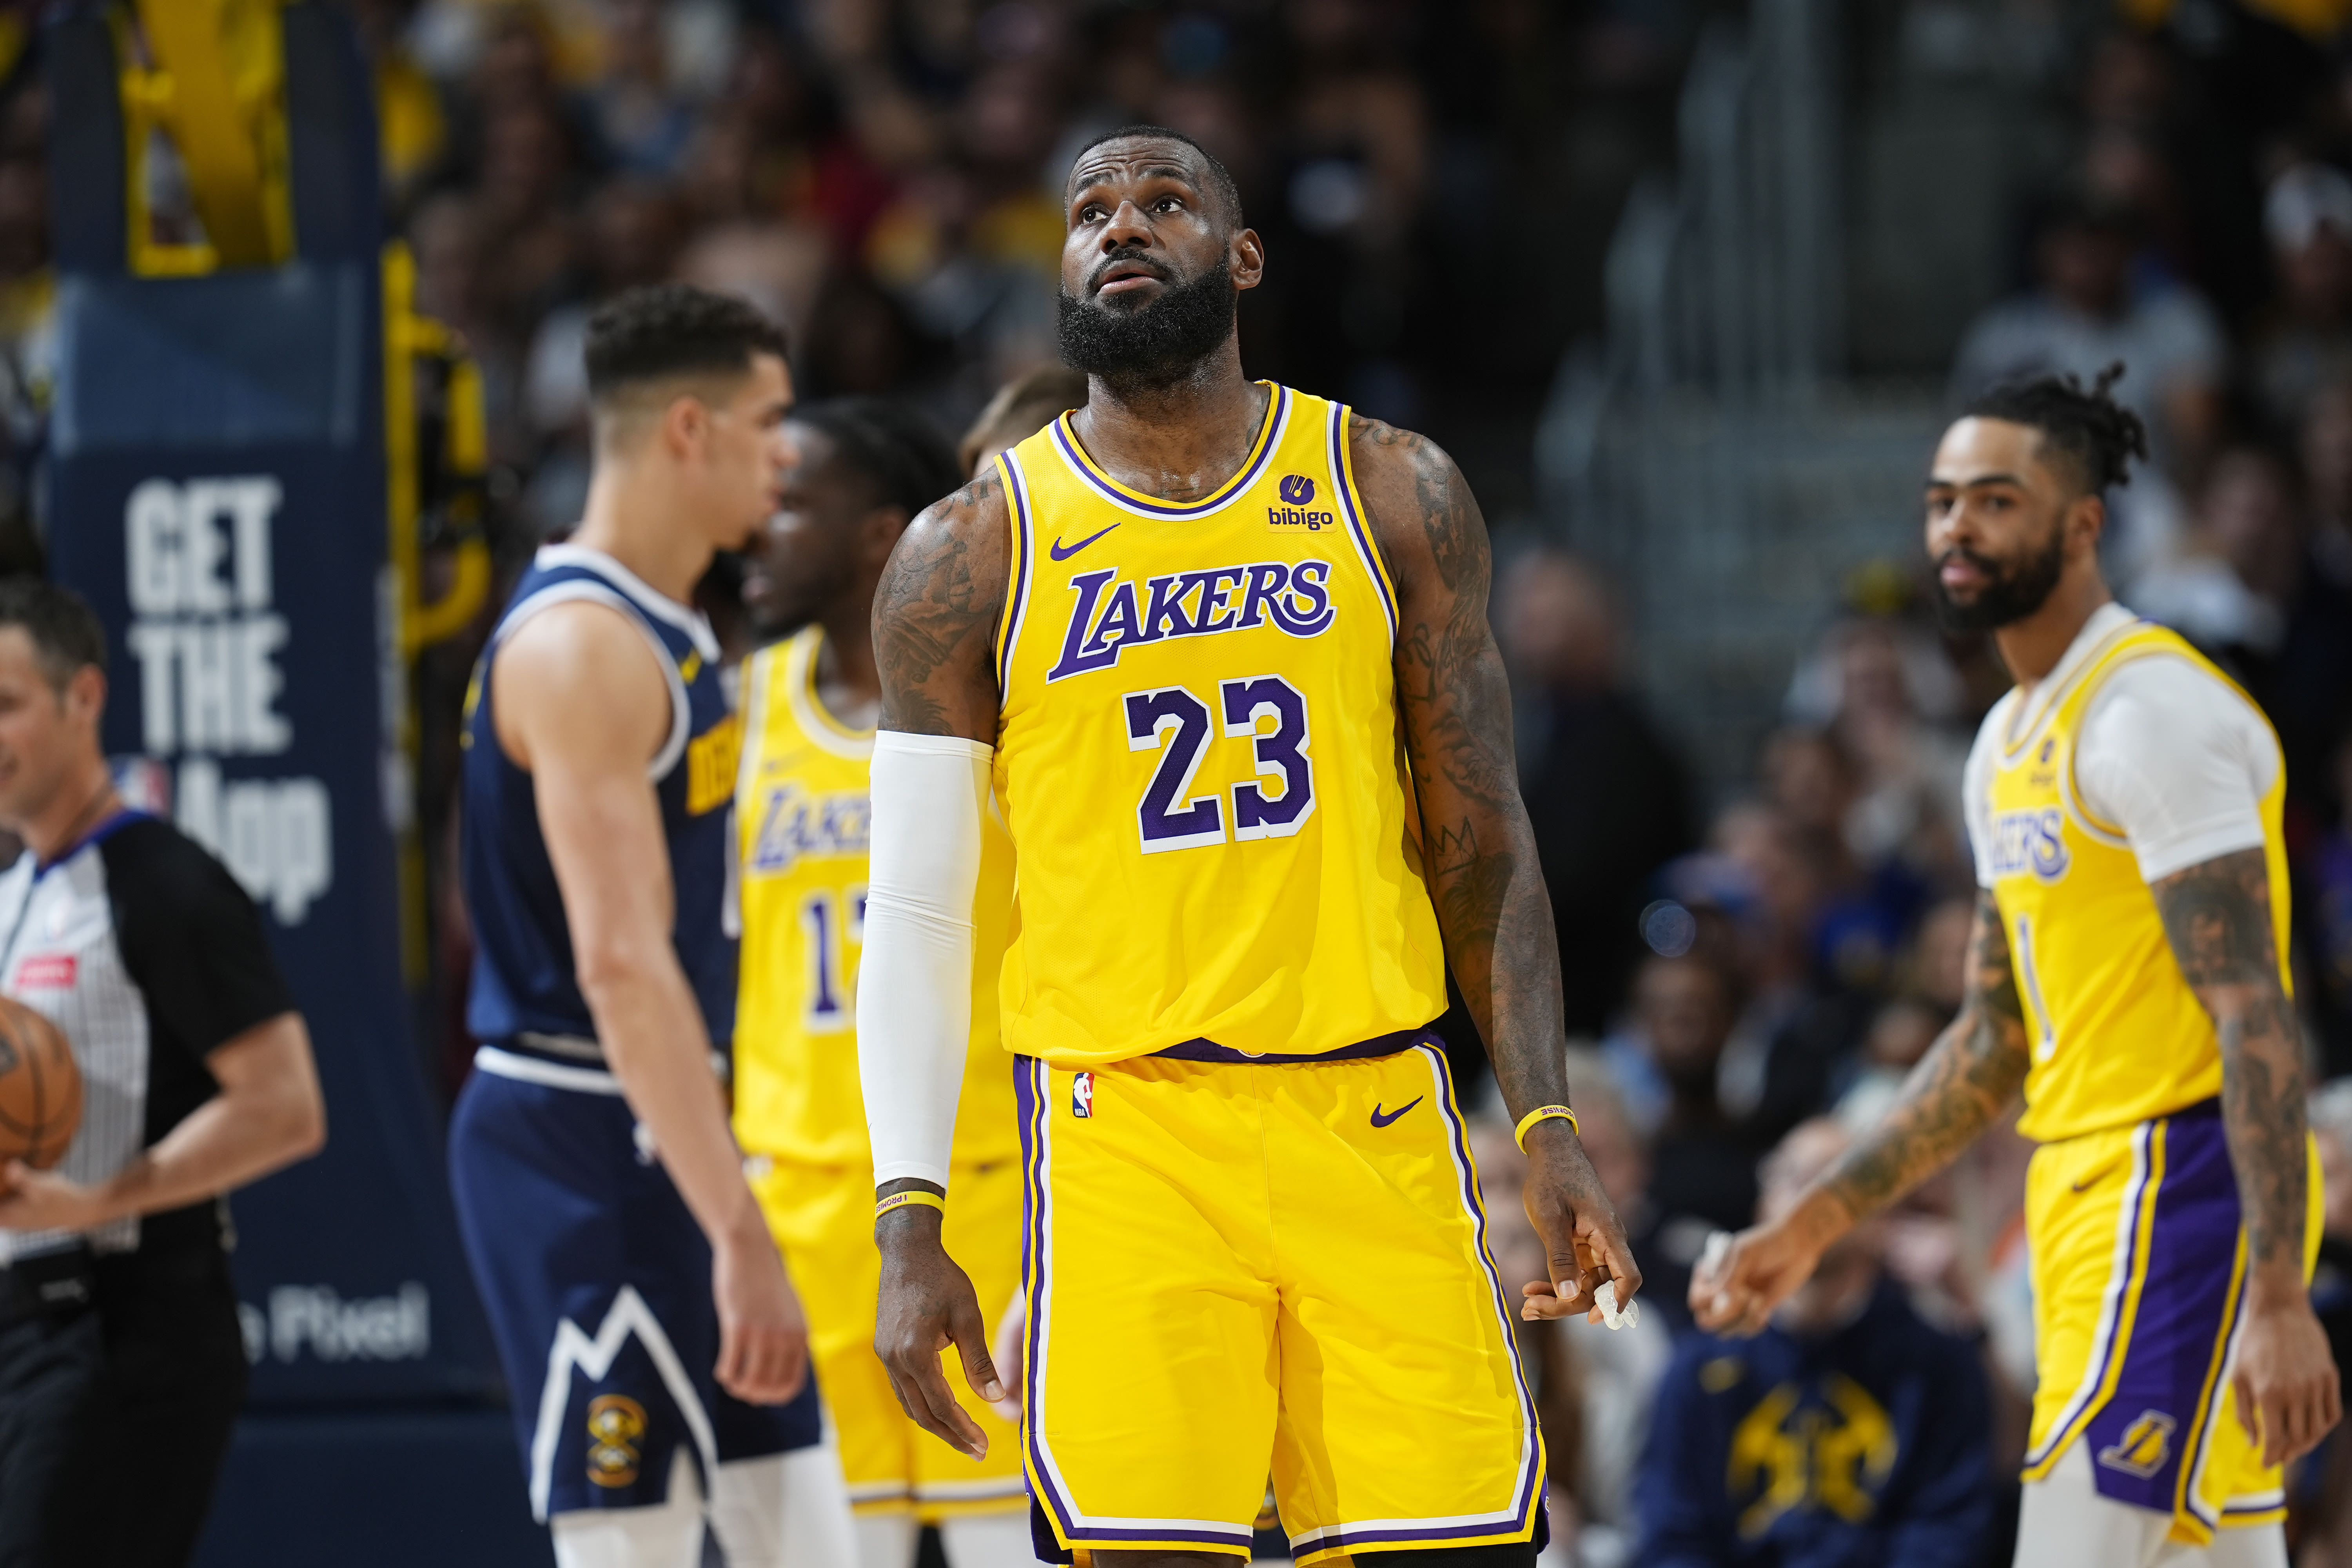 Lakers newsletter: Why have the Lakers been so slow to upgrade their roster?